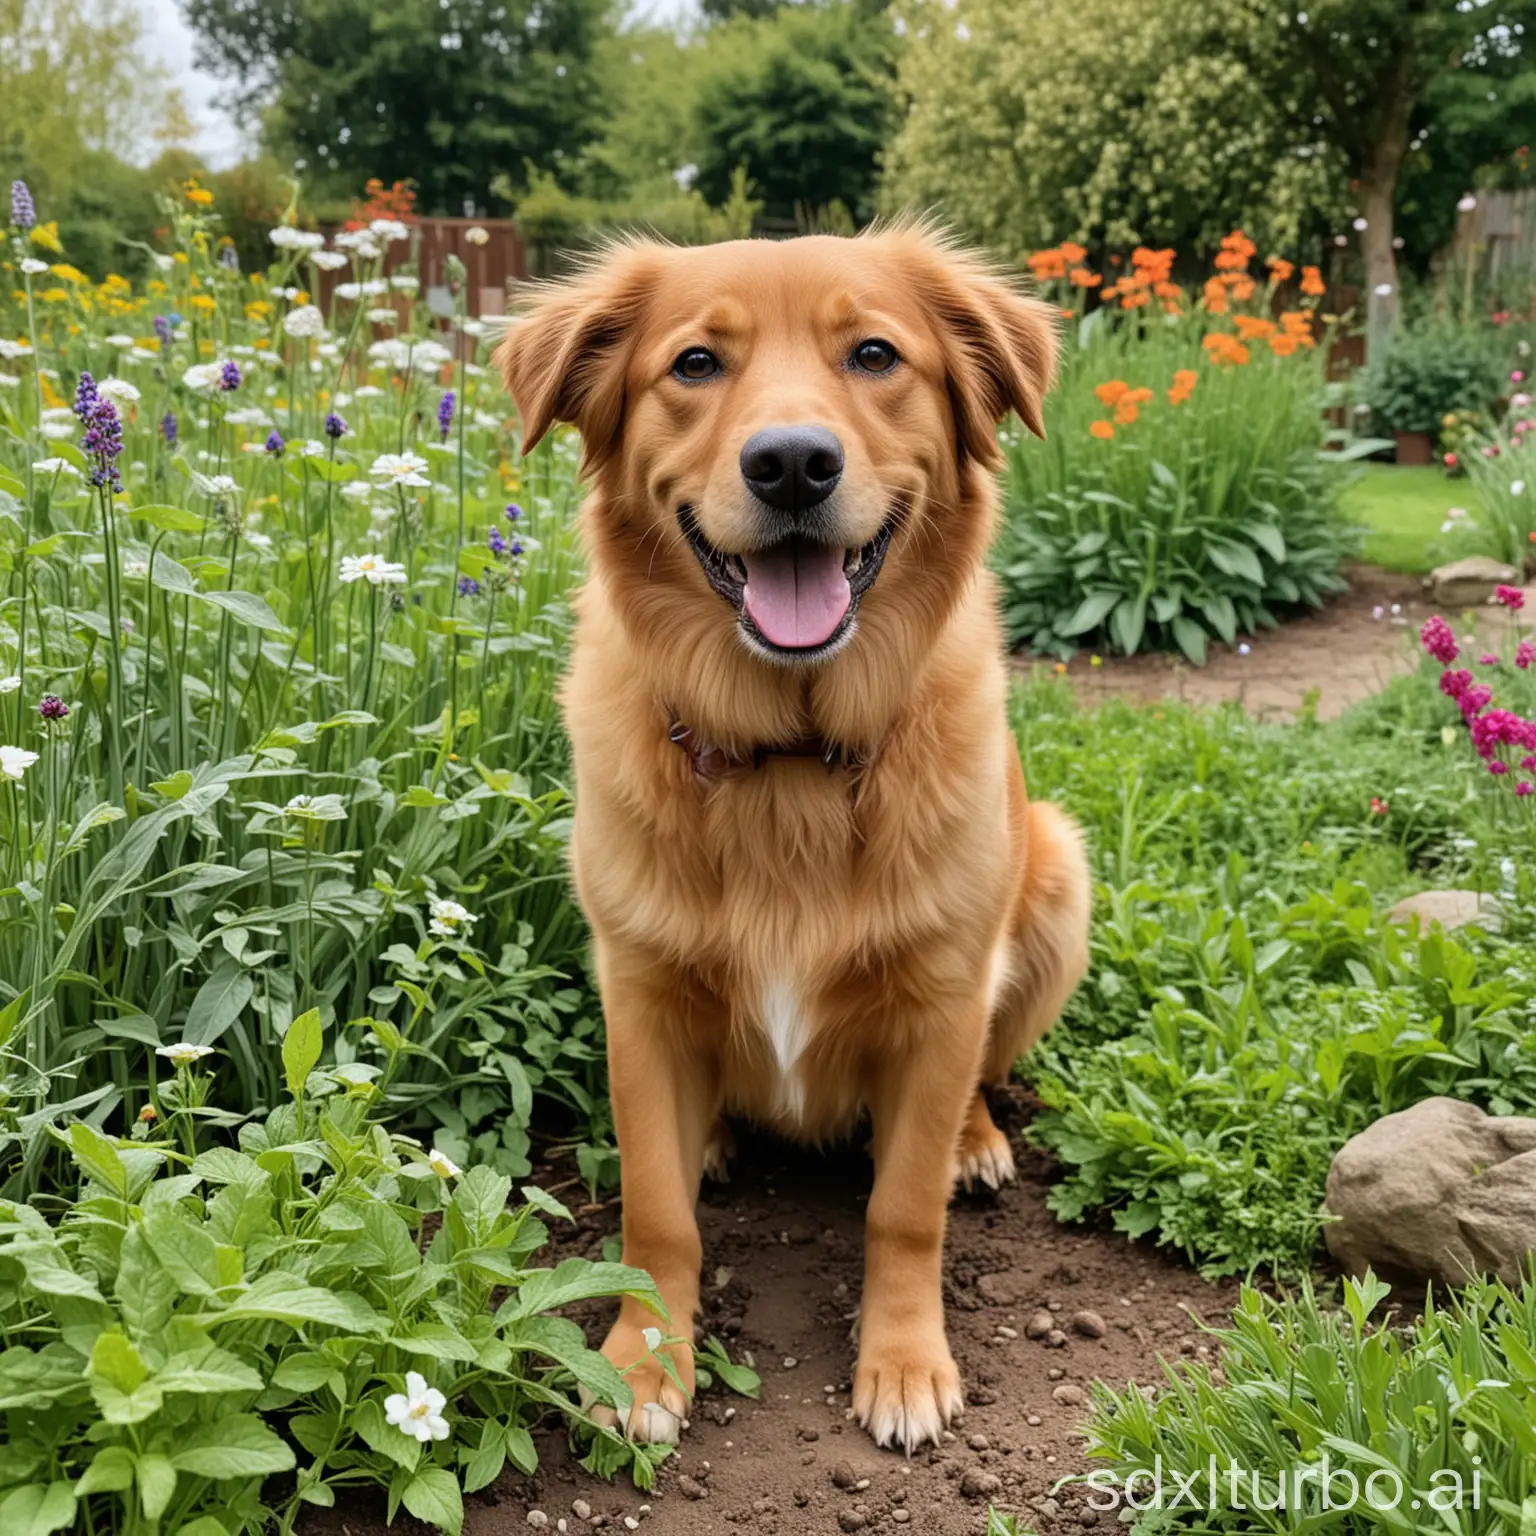 The happy dog ​​in the garden